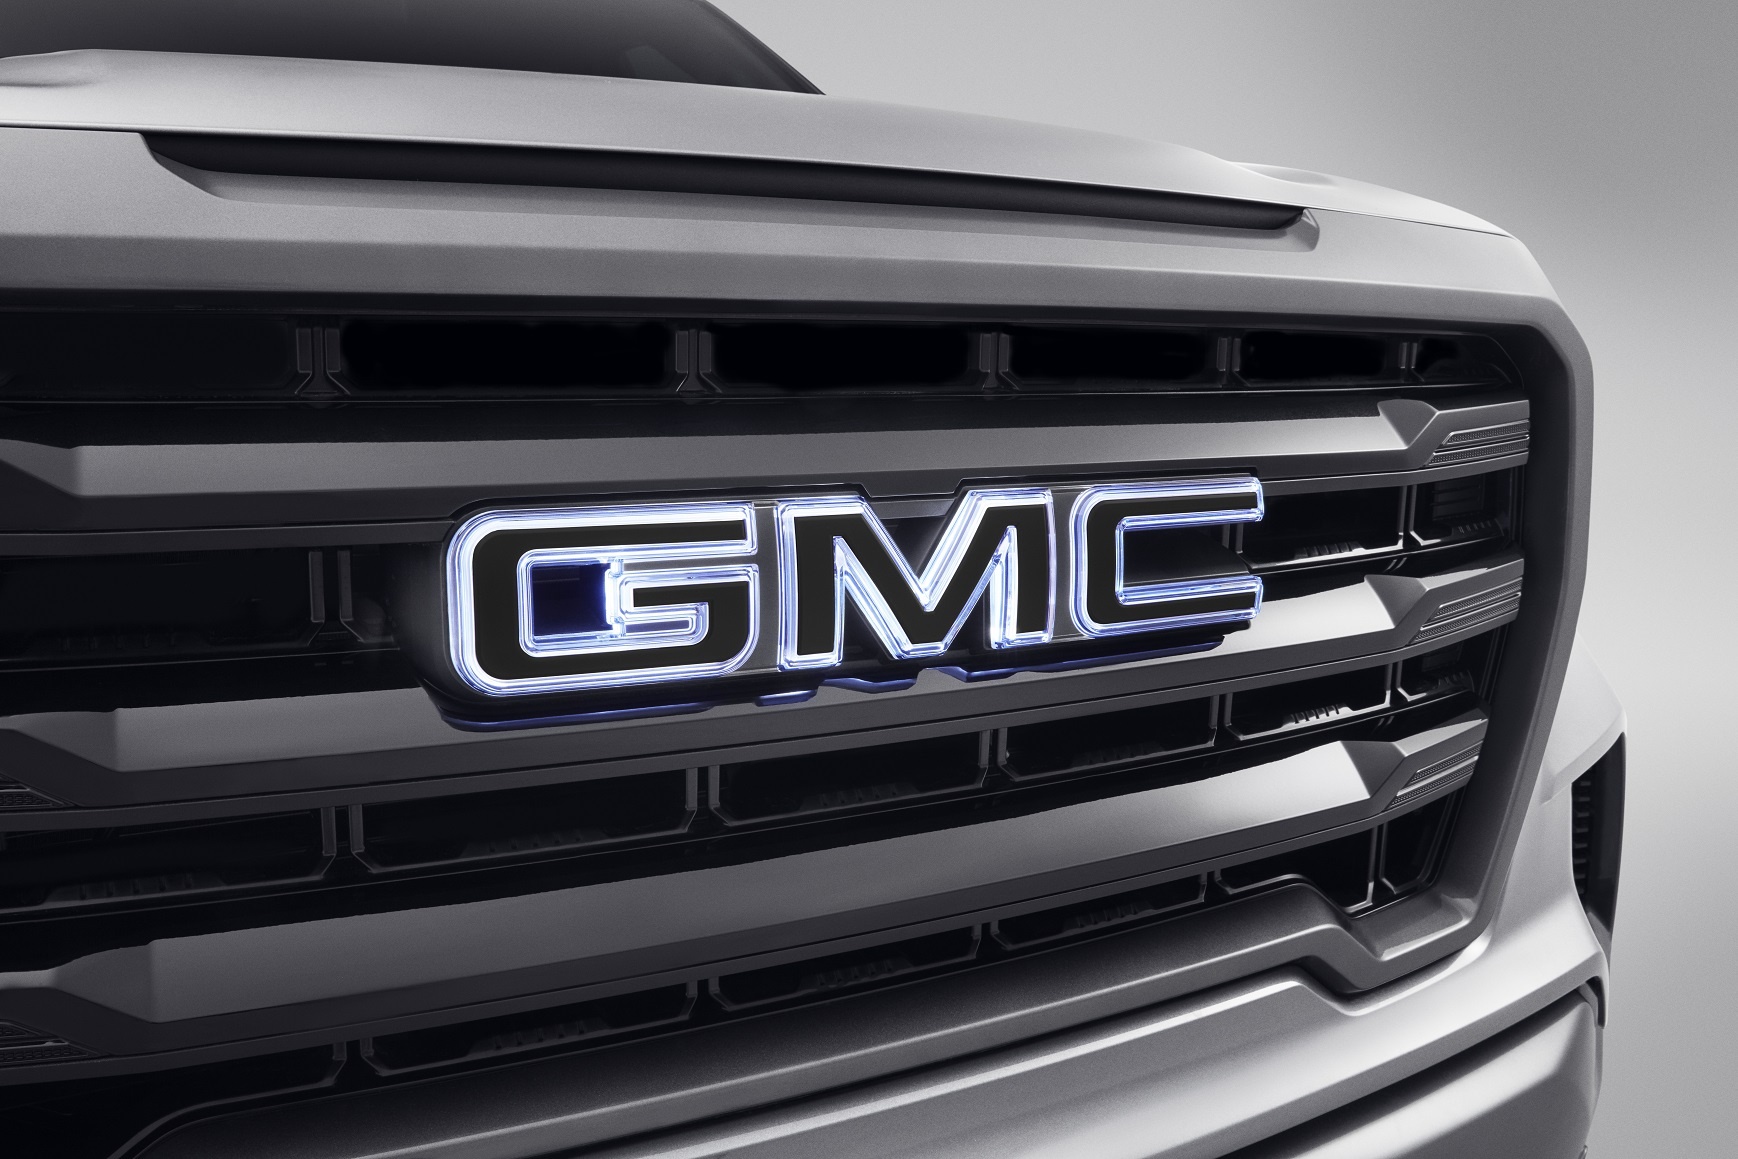 GMC Accessories: Giving each customer a unique ‘on road’ experience